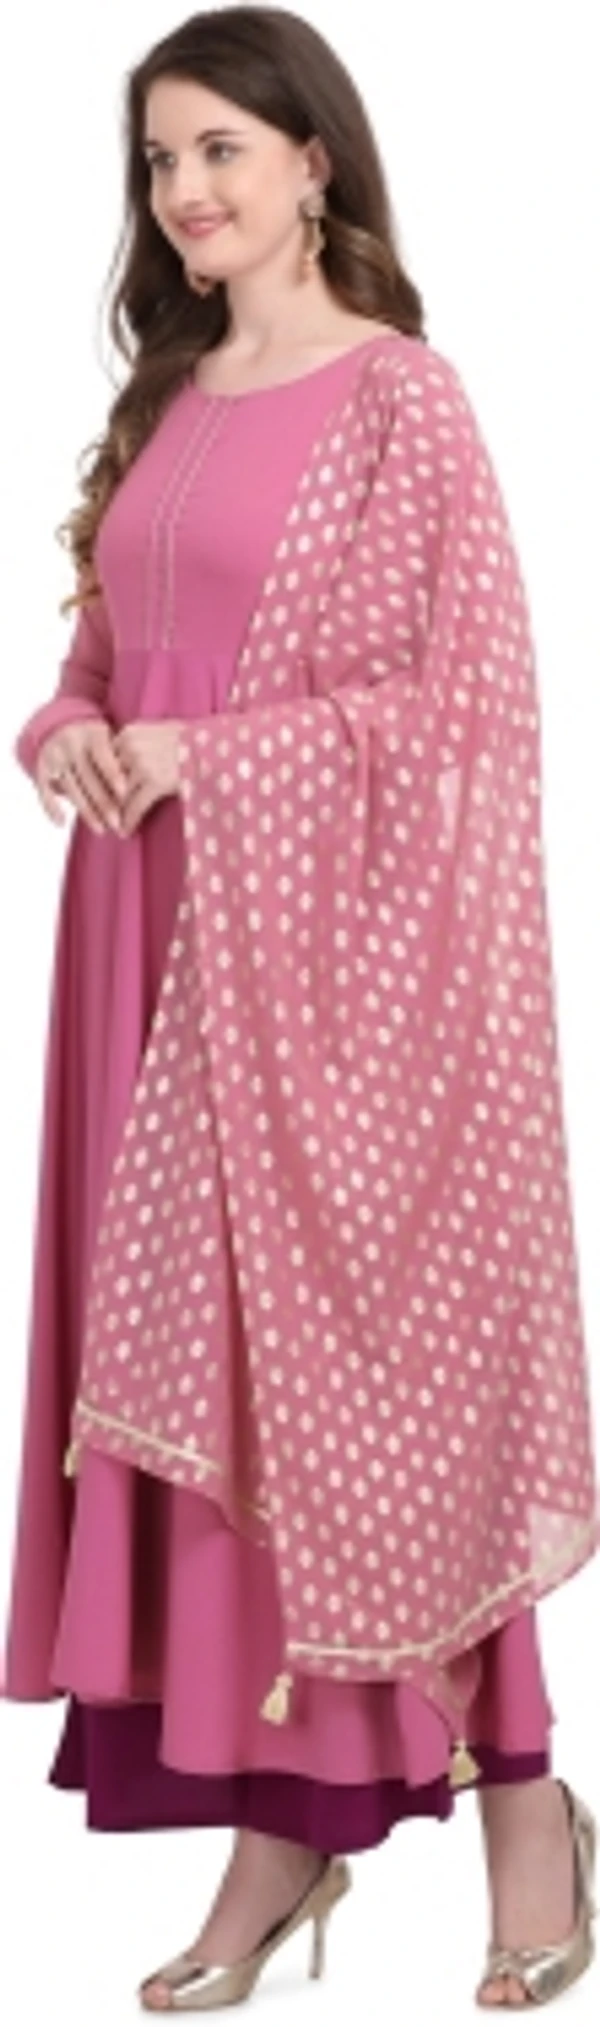 THE FAB FACTORY Women Kurta and Dupatta SetGeorgette, Crepe FabricFull SleeveSolid PatternColor: PinkFor Women10 Days Return Policy, No questions asked. - S